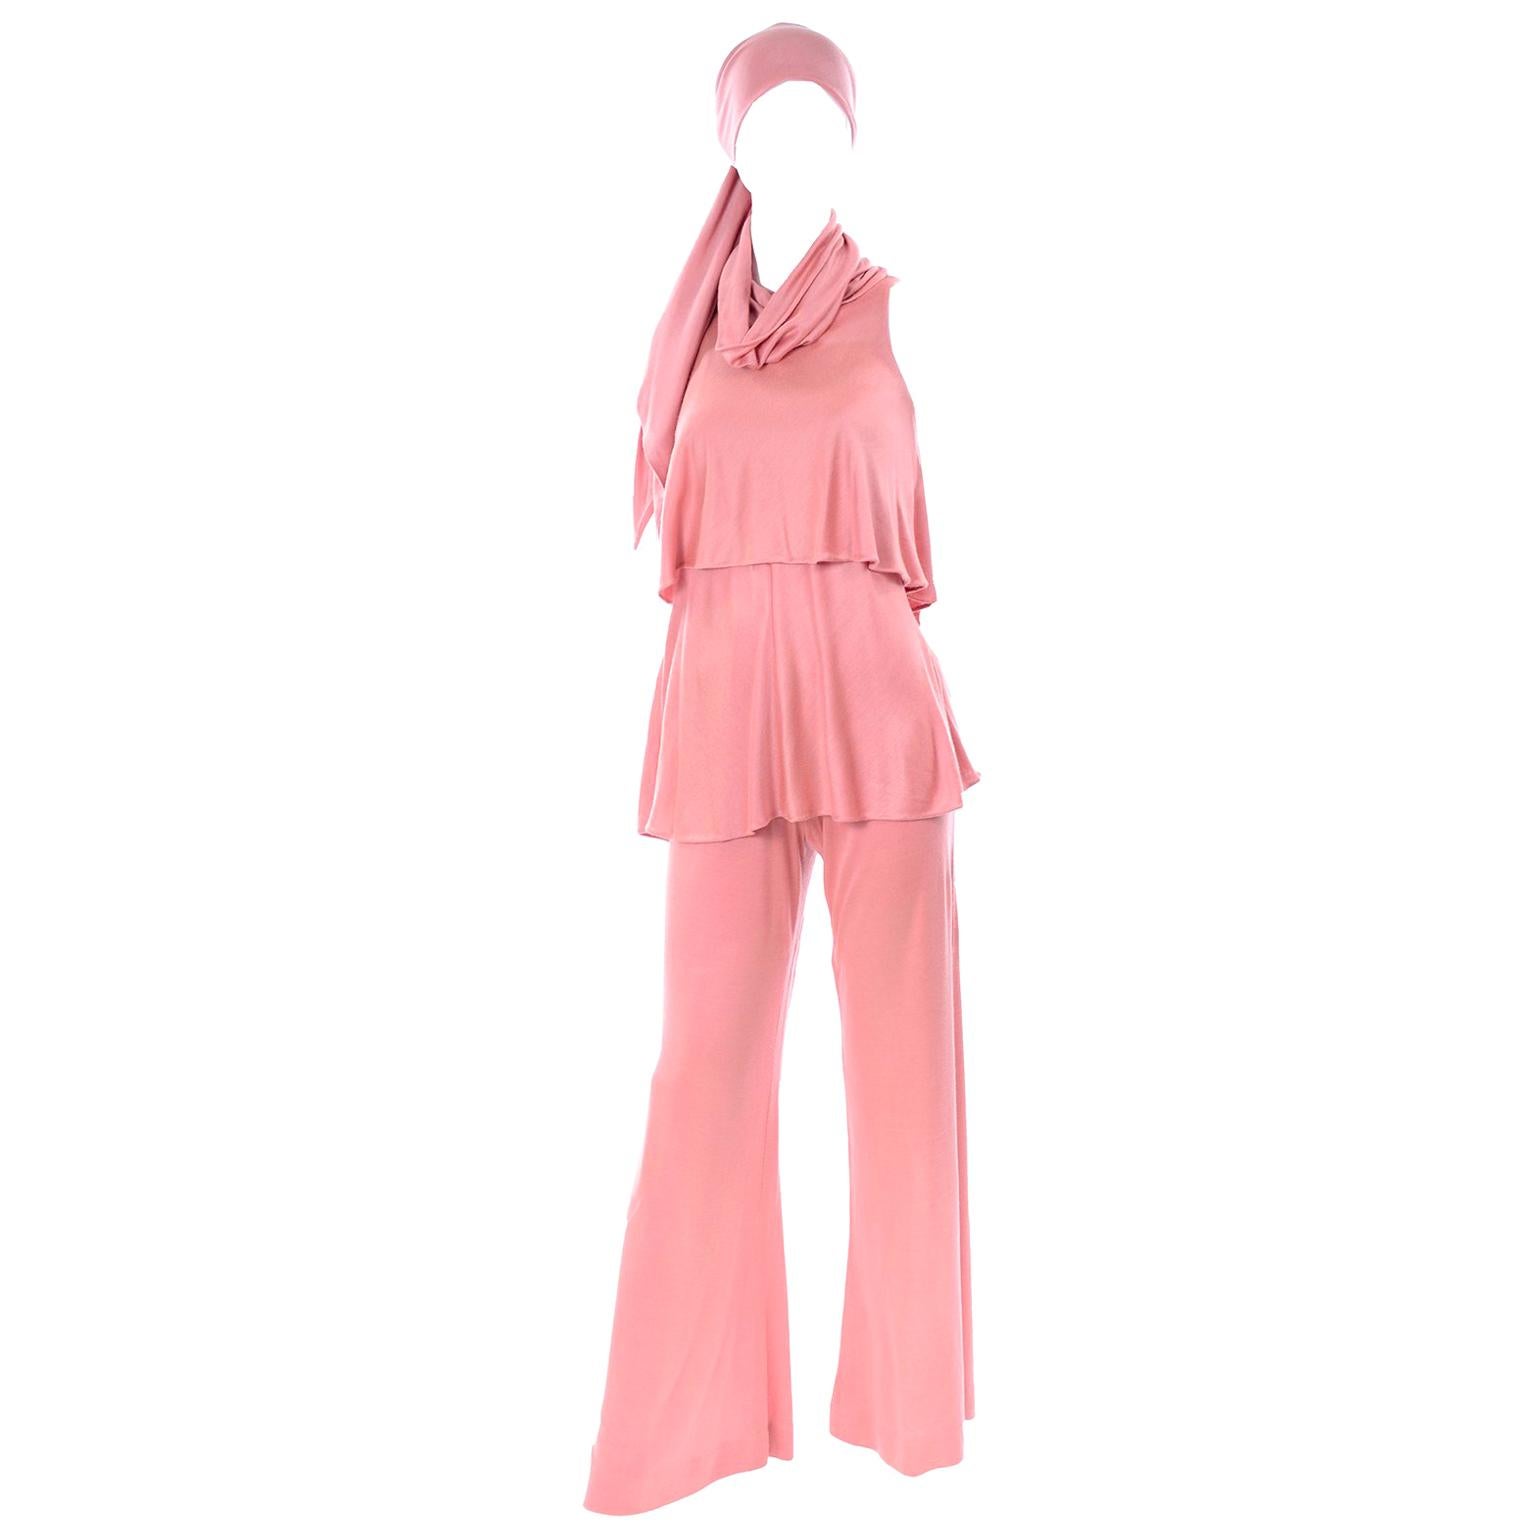 Adri Mary Adrienne Steckling Coen Vintage Coral Pink Outfit W Pants Top & Scarf